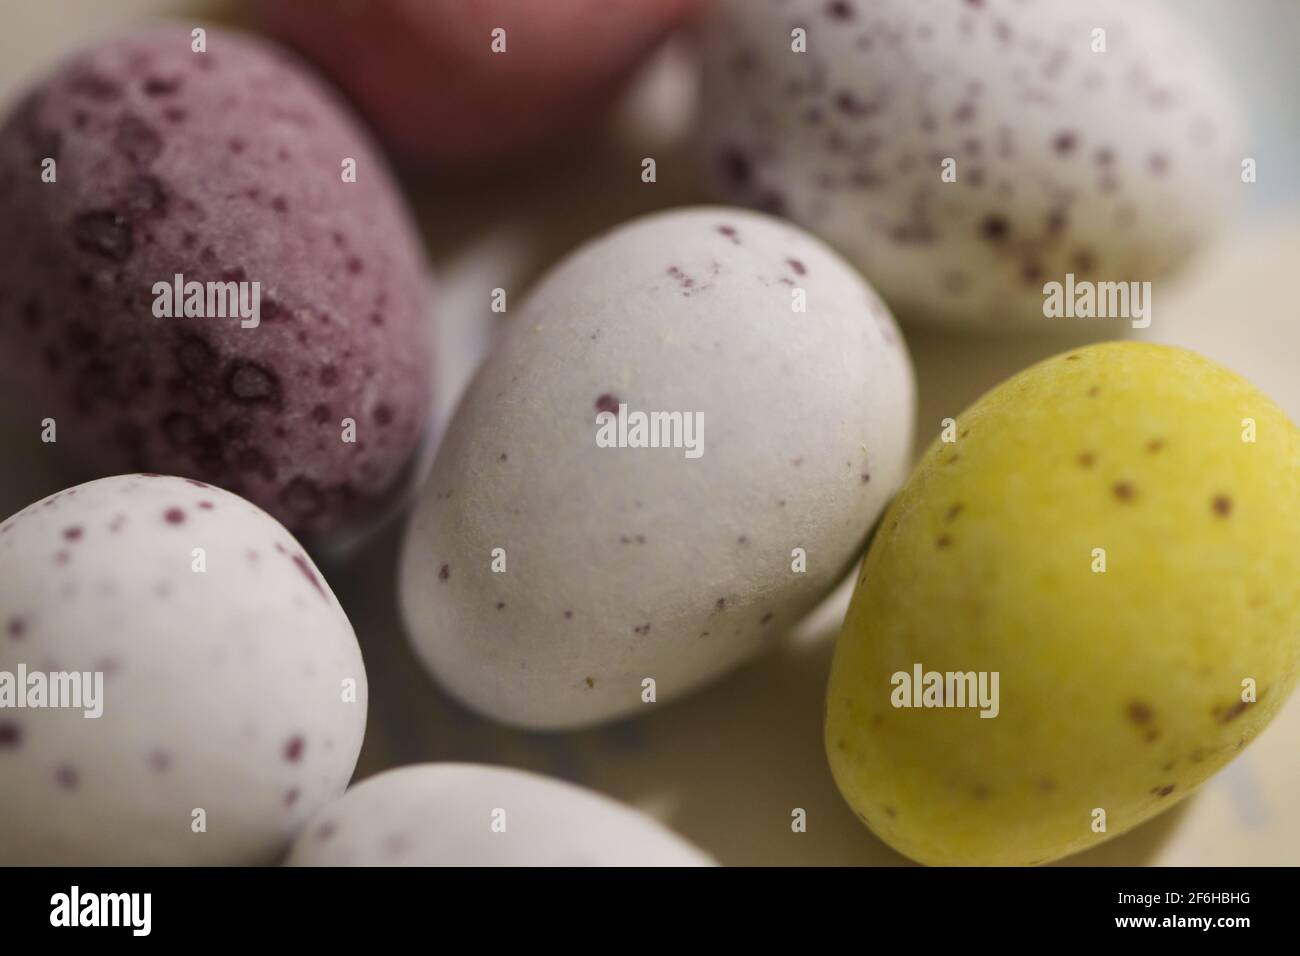 A tempting looking macro shot of some chocolate eggs with a shallow depth of field Stock Photo